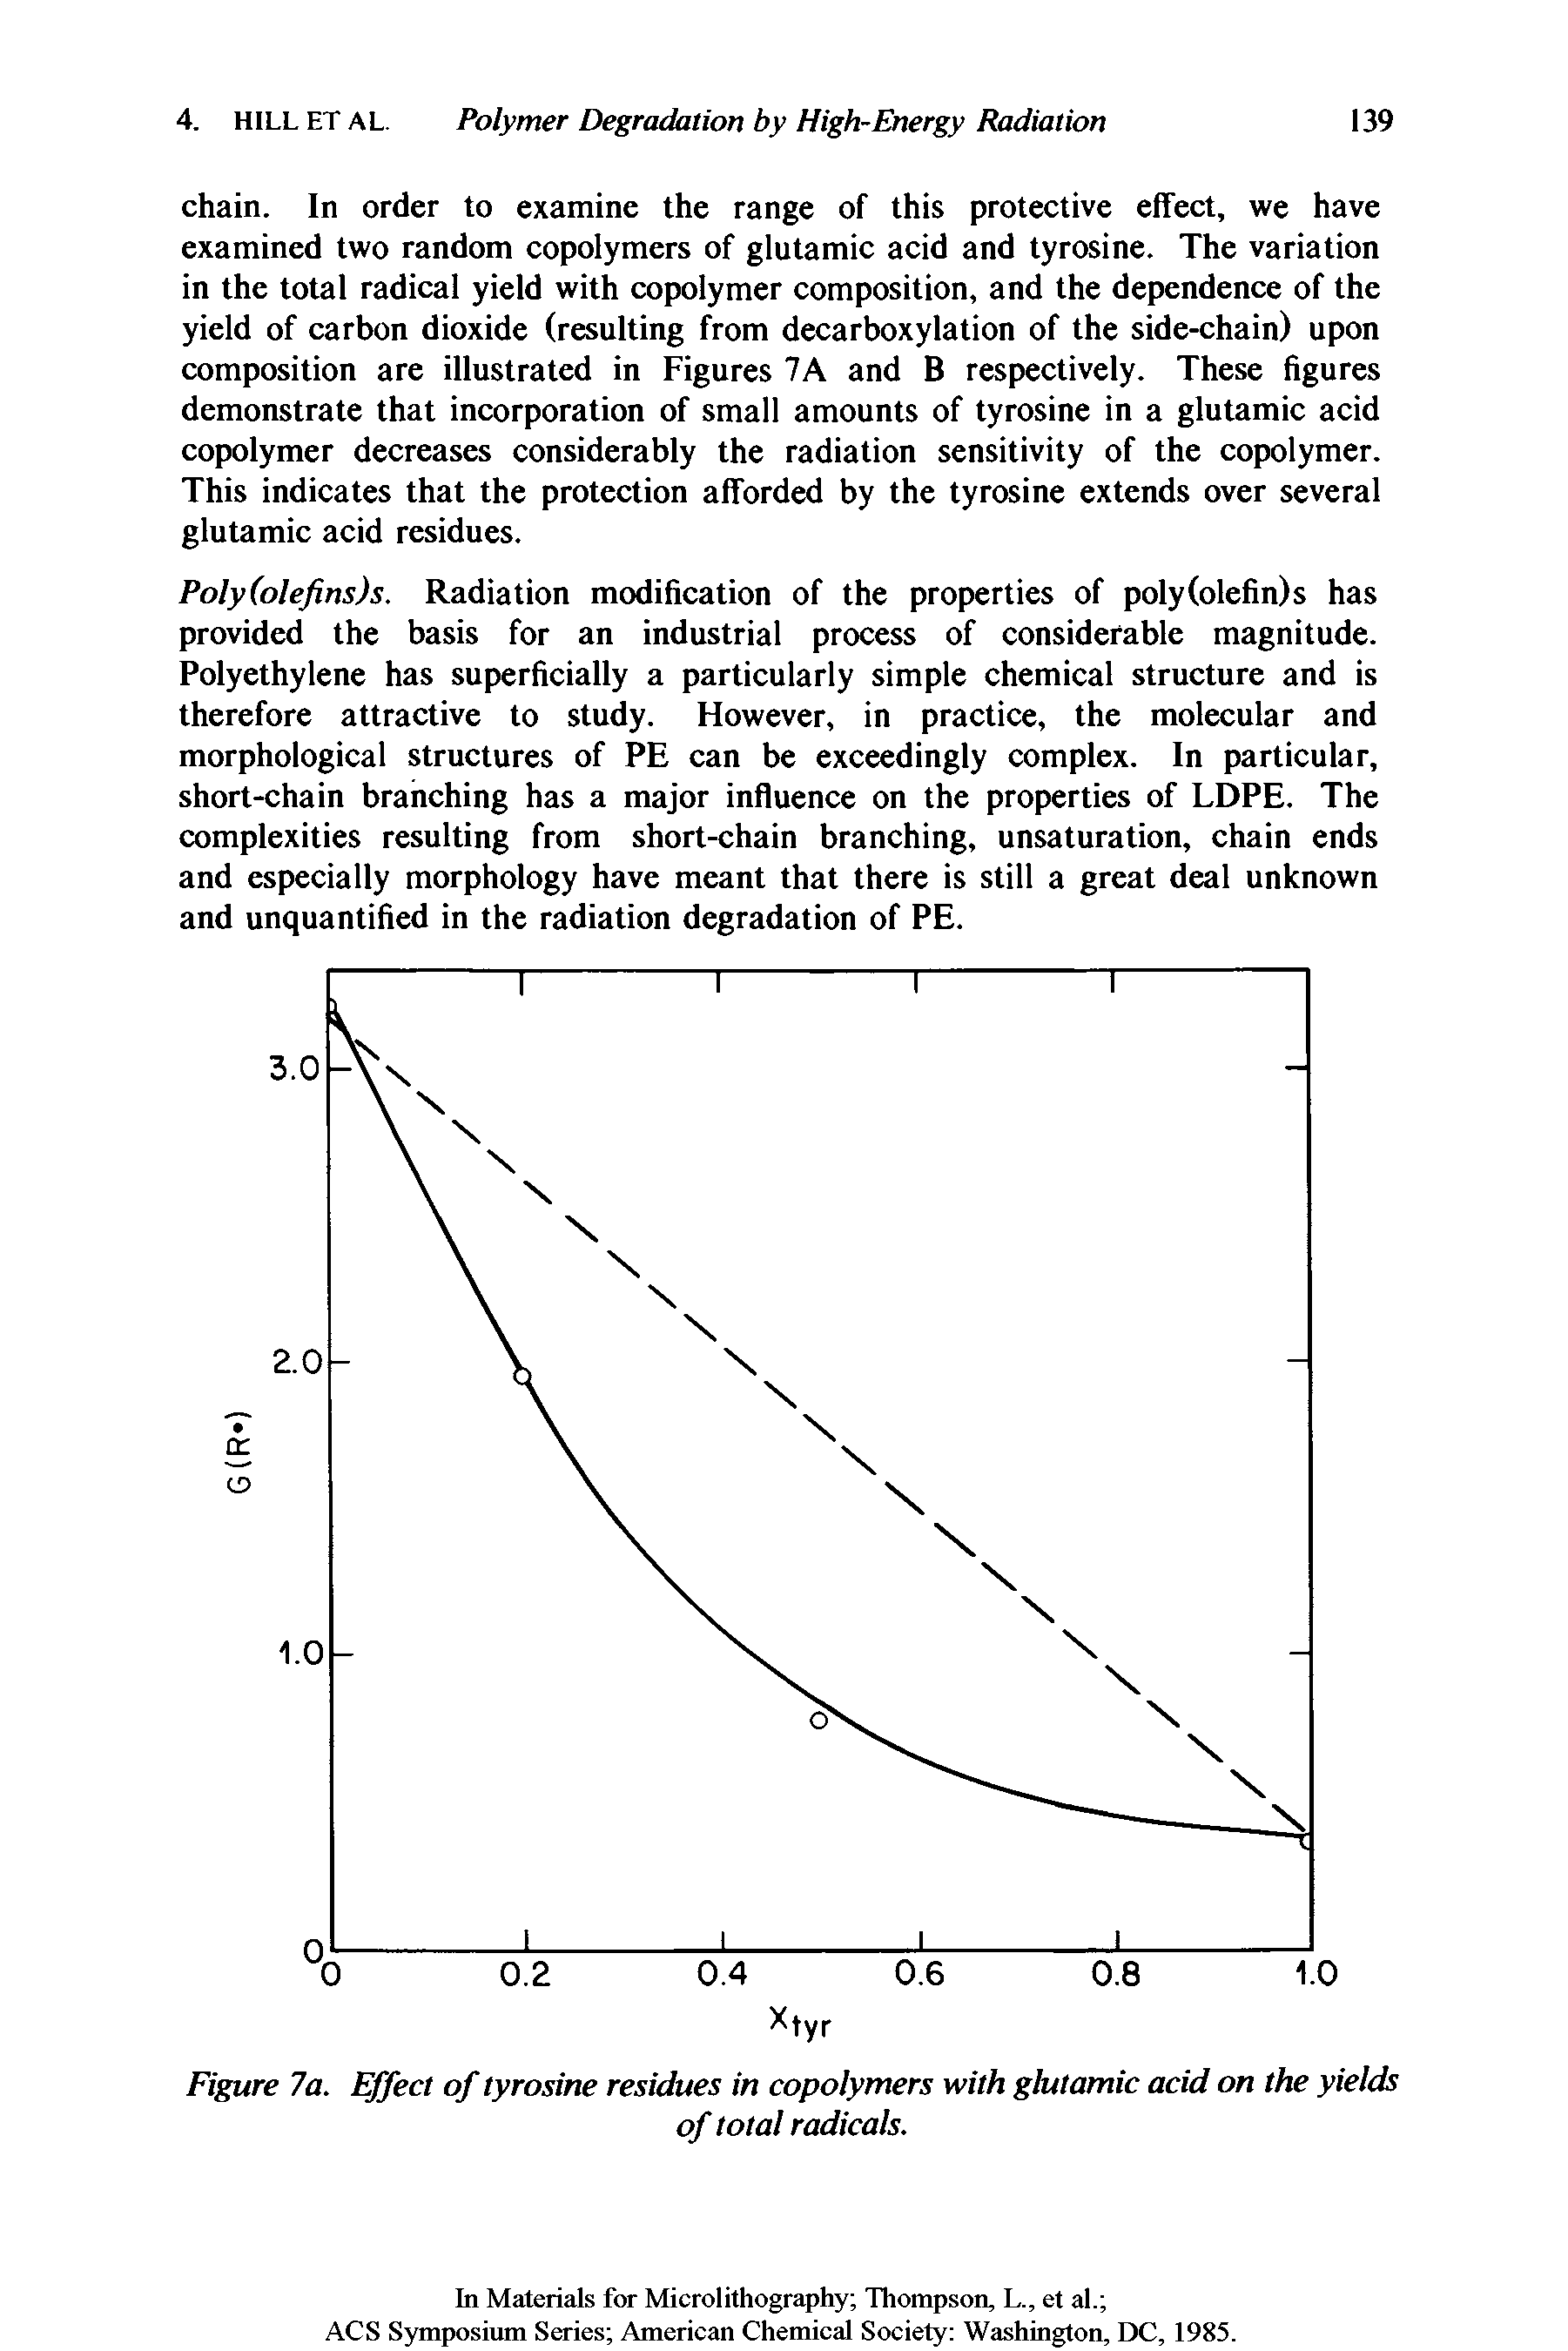 Figure 7a. Effect of tyrosine residues in copolymers with glutamic acid on the yields...